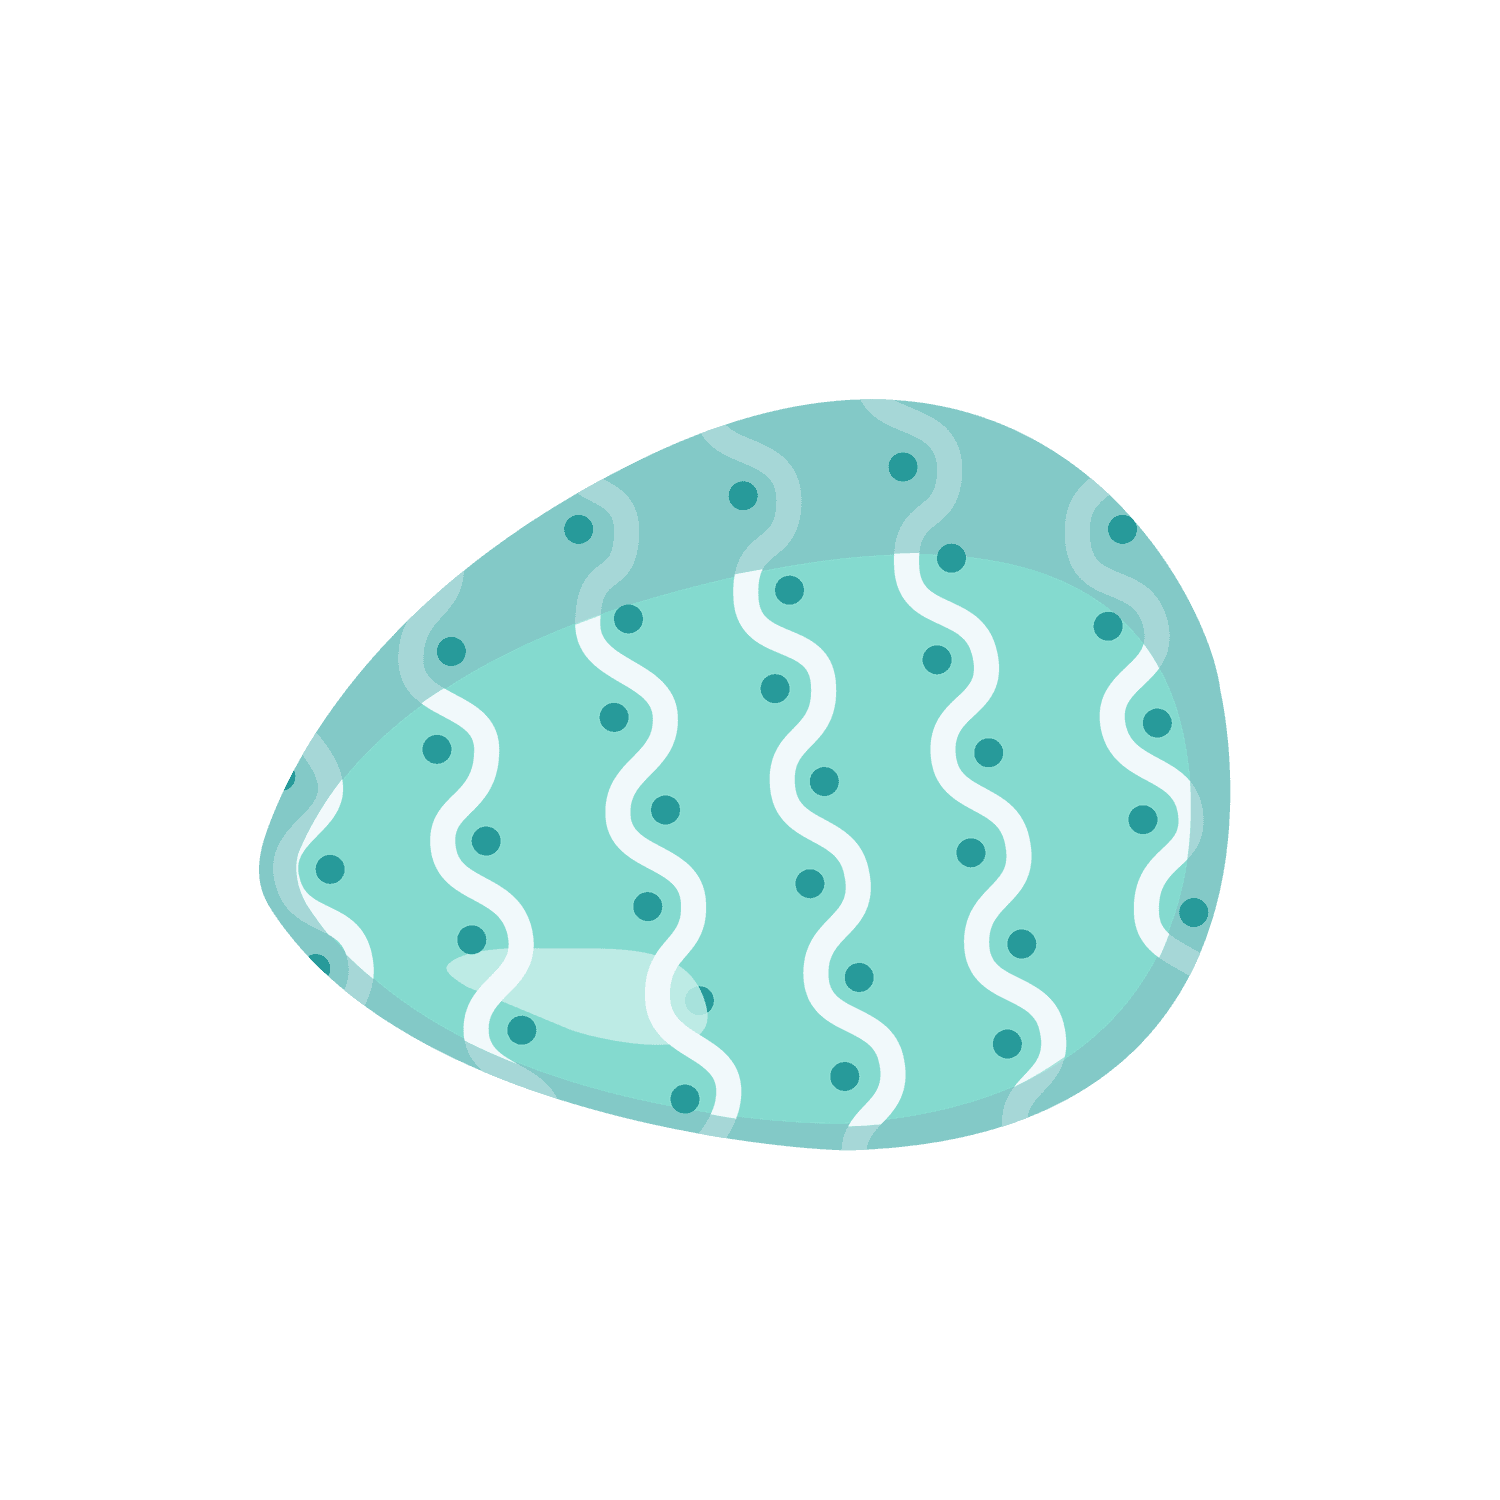 easter egg illustration cartoon style bright colors